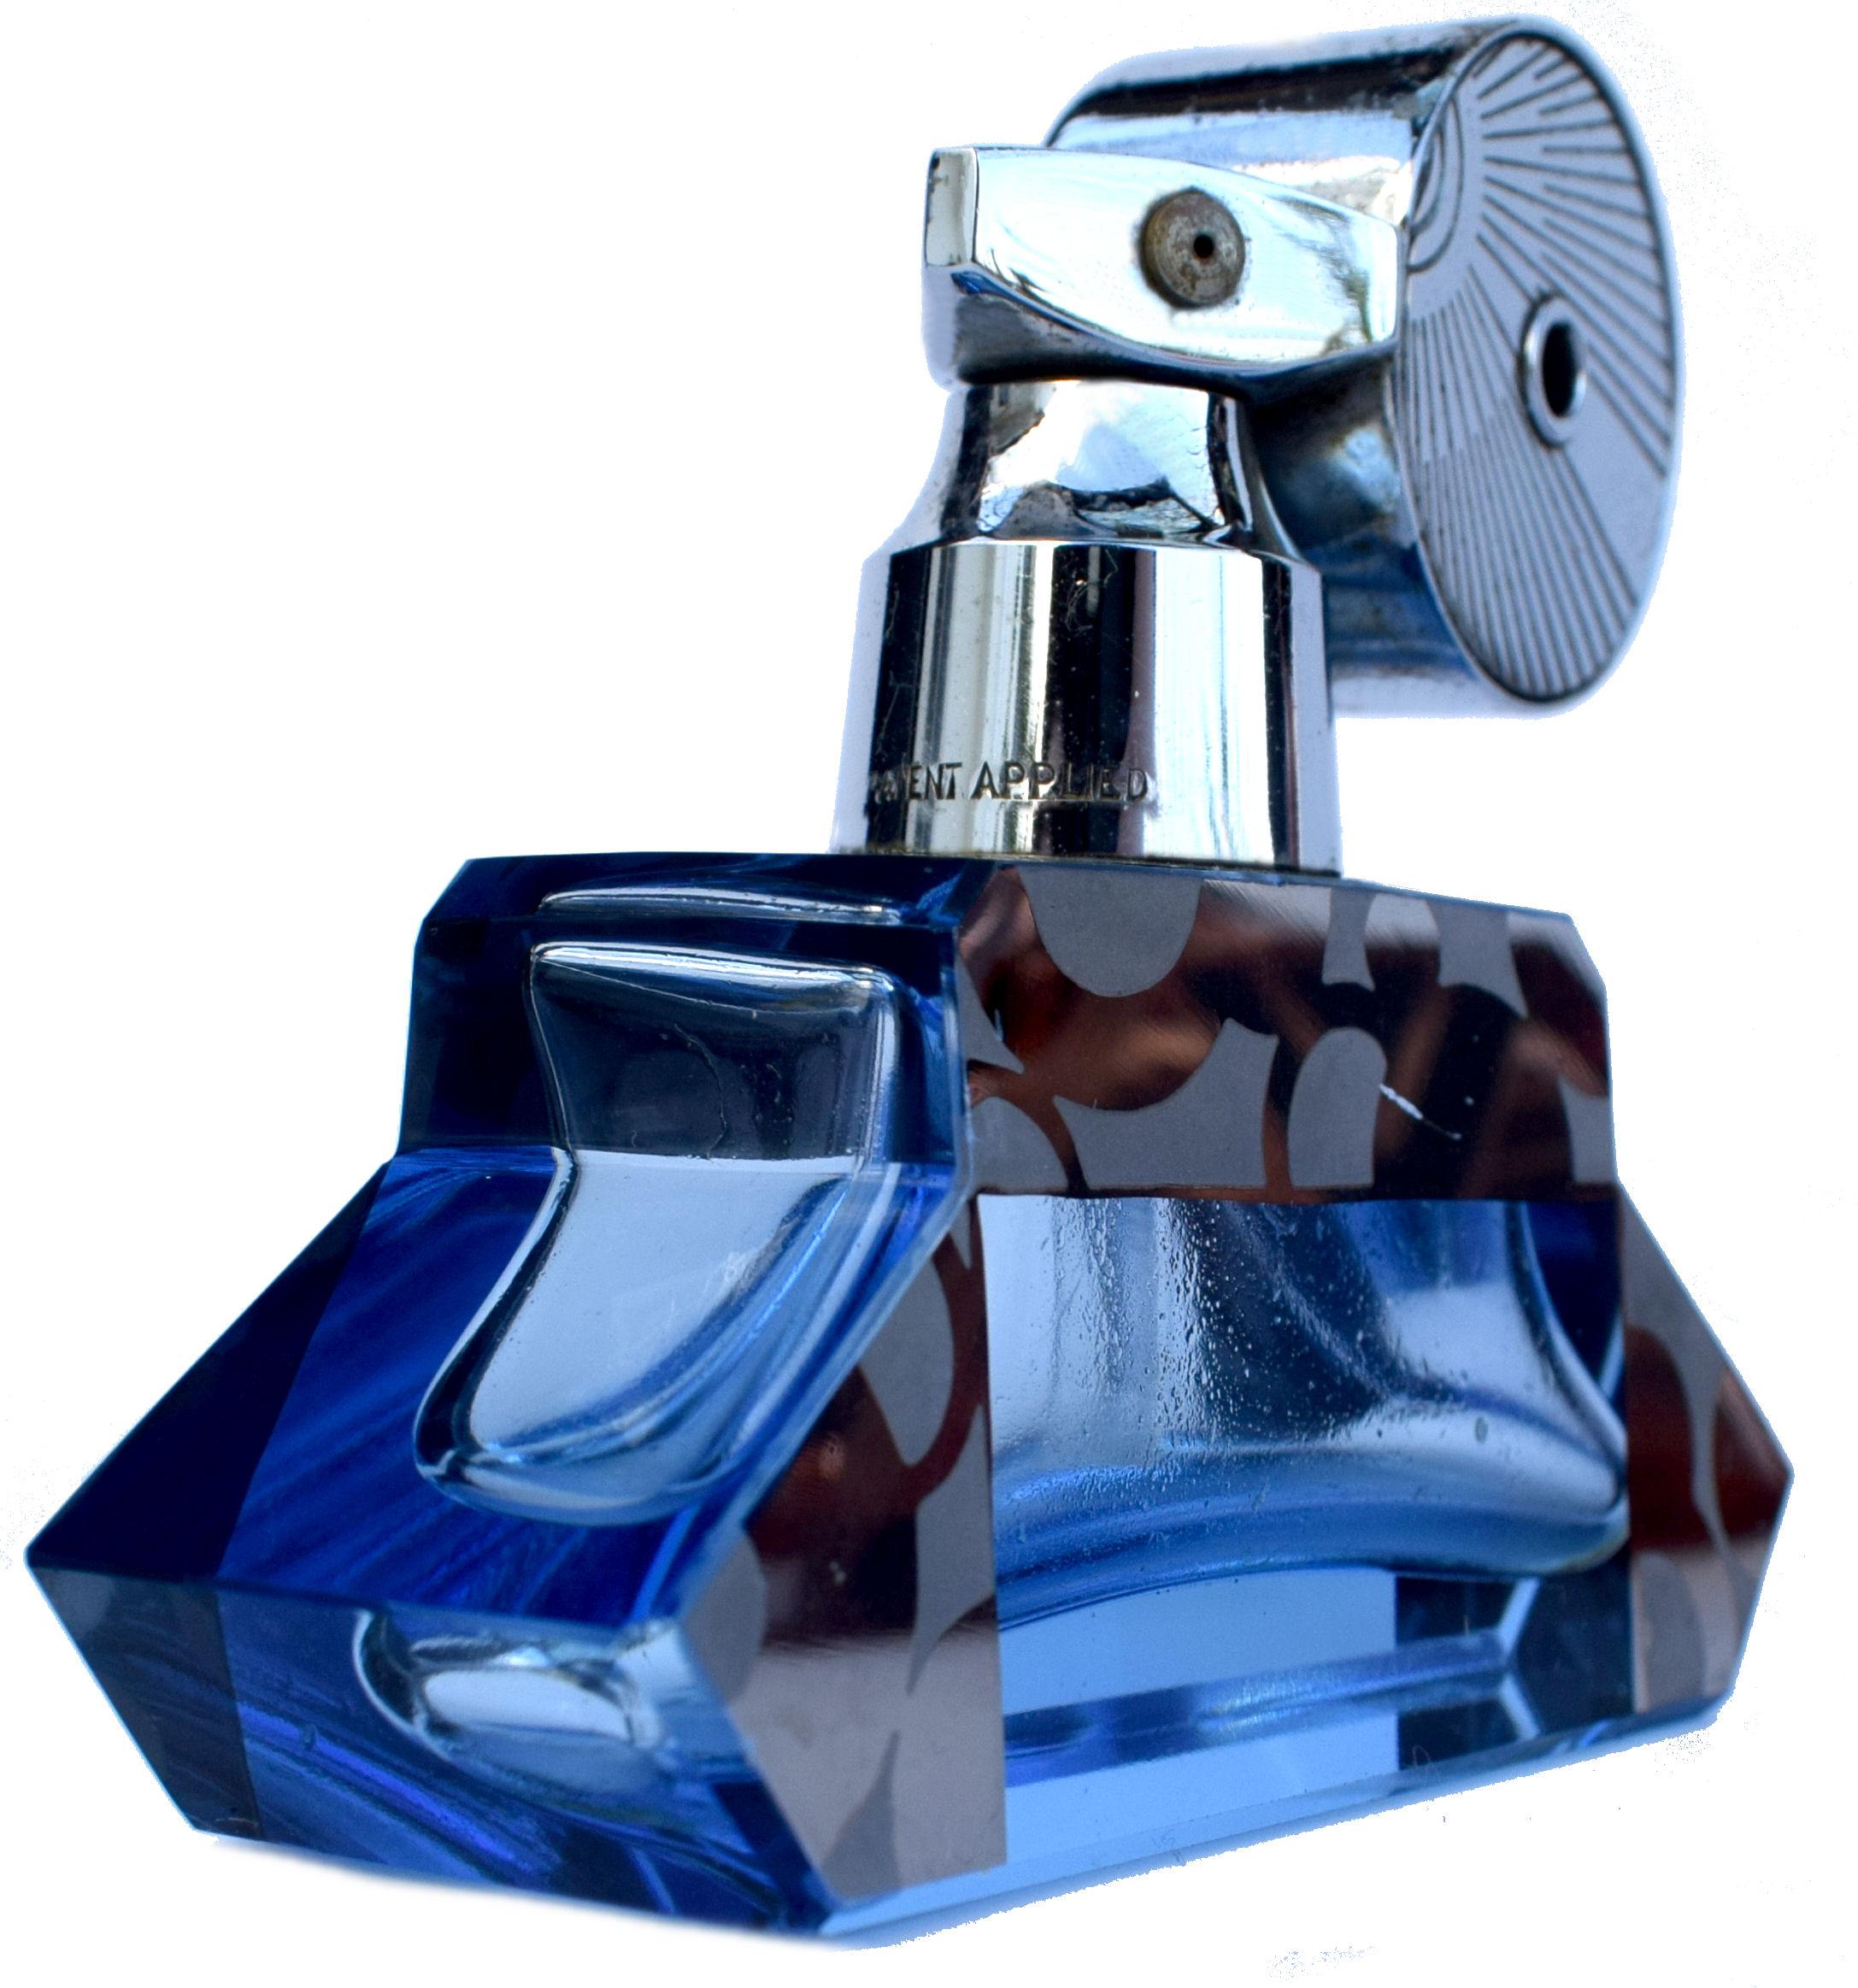 A stylish English 1930s streamline Art Deco atomizer perfume/ scent bottle. Chrome top sprayer with blue glass scent bottle with silver /black enamel decoration to the sides. The neck to the chrome sprayer is marked 'patent pending'. Overall